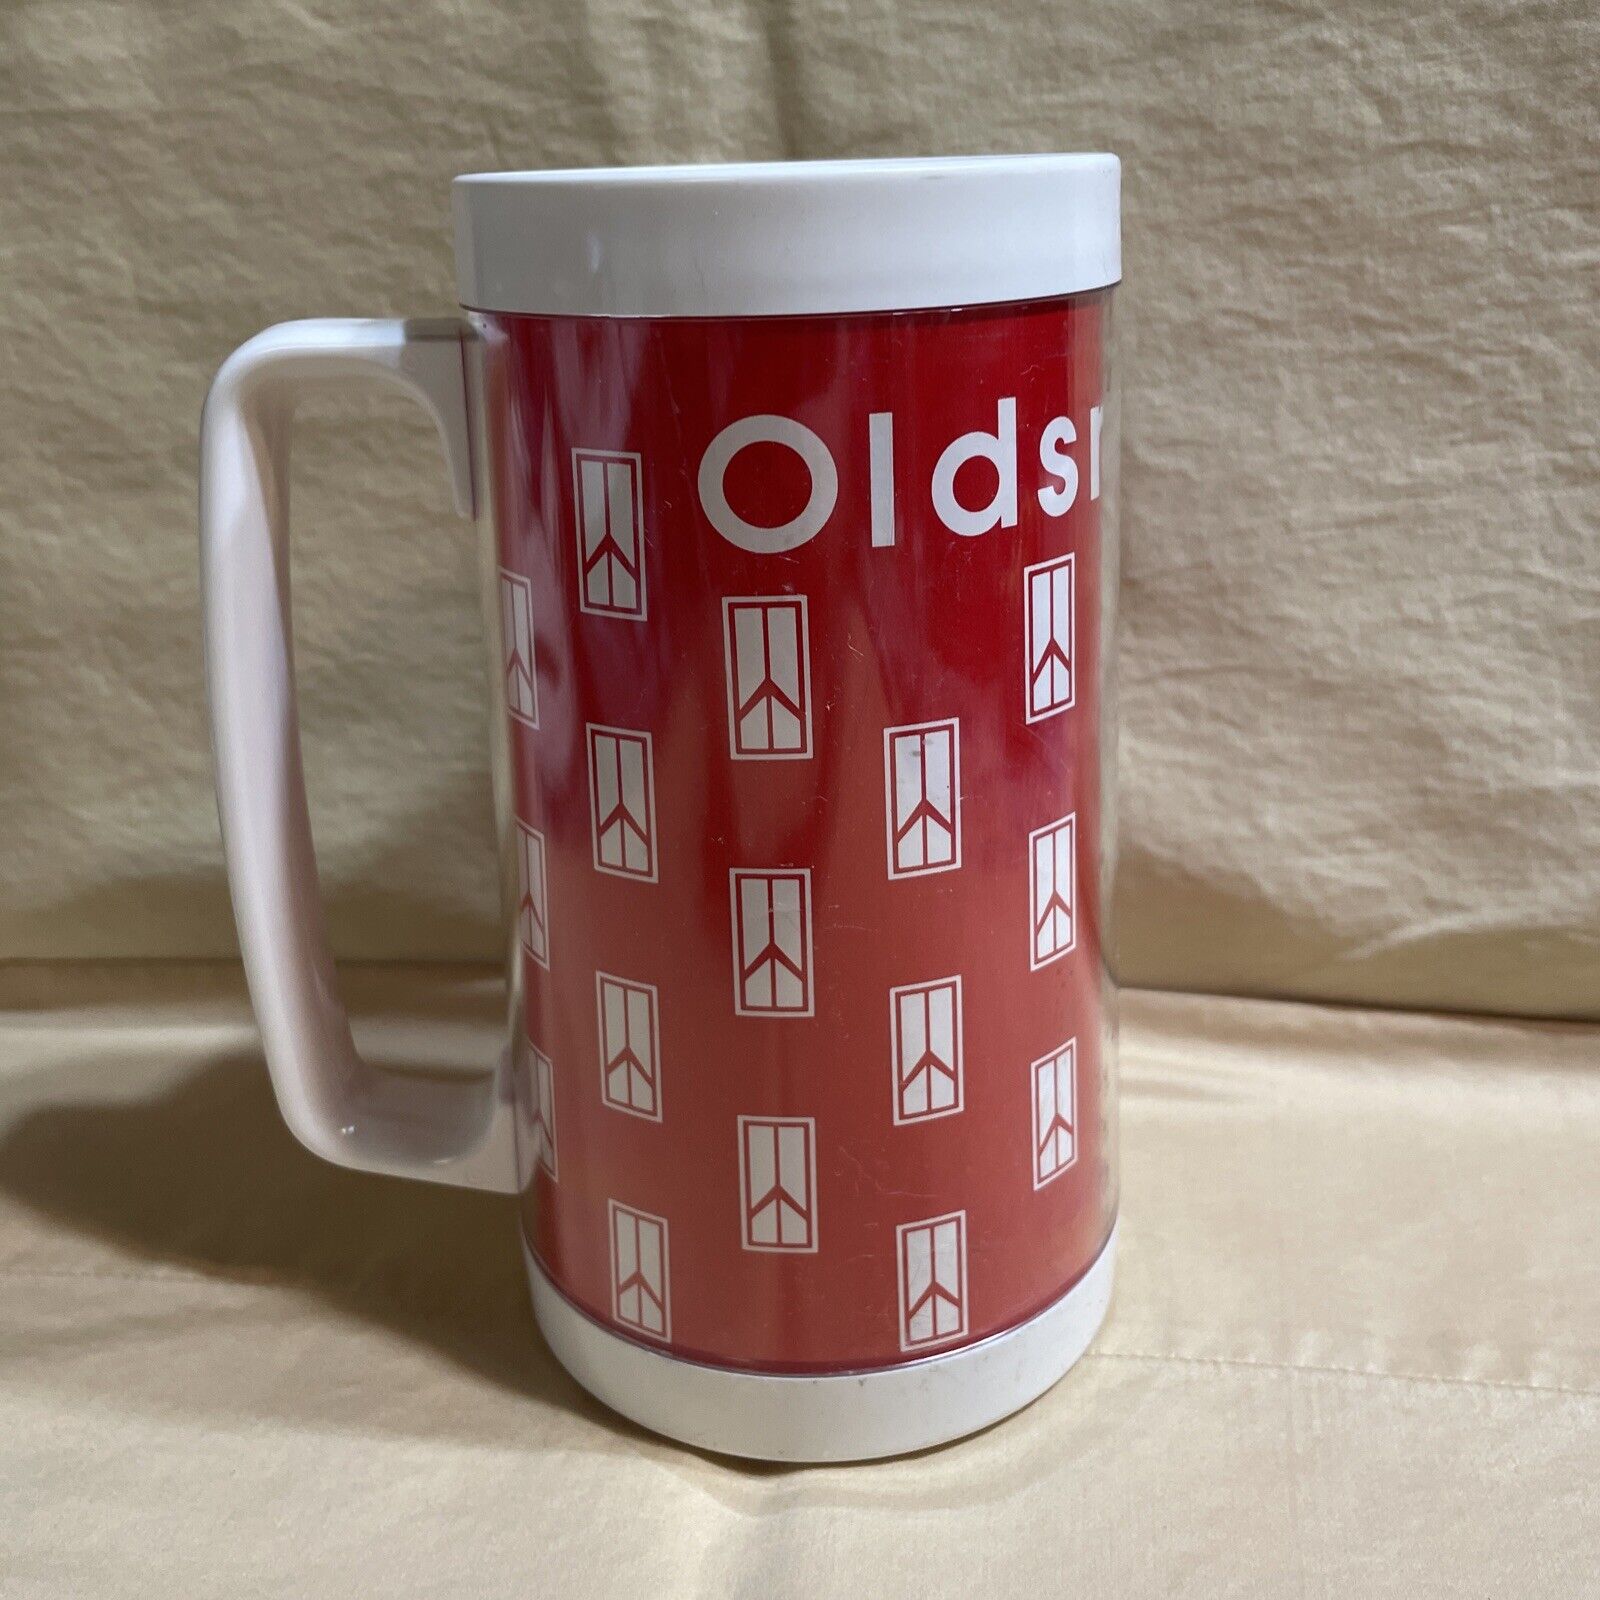 Vintage Oldsmobile Collectible Plastic Mug Beer Stein White & Red Rare